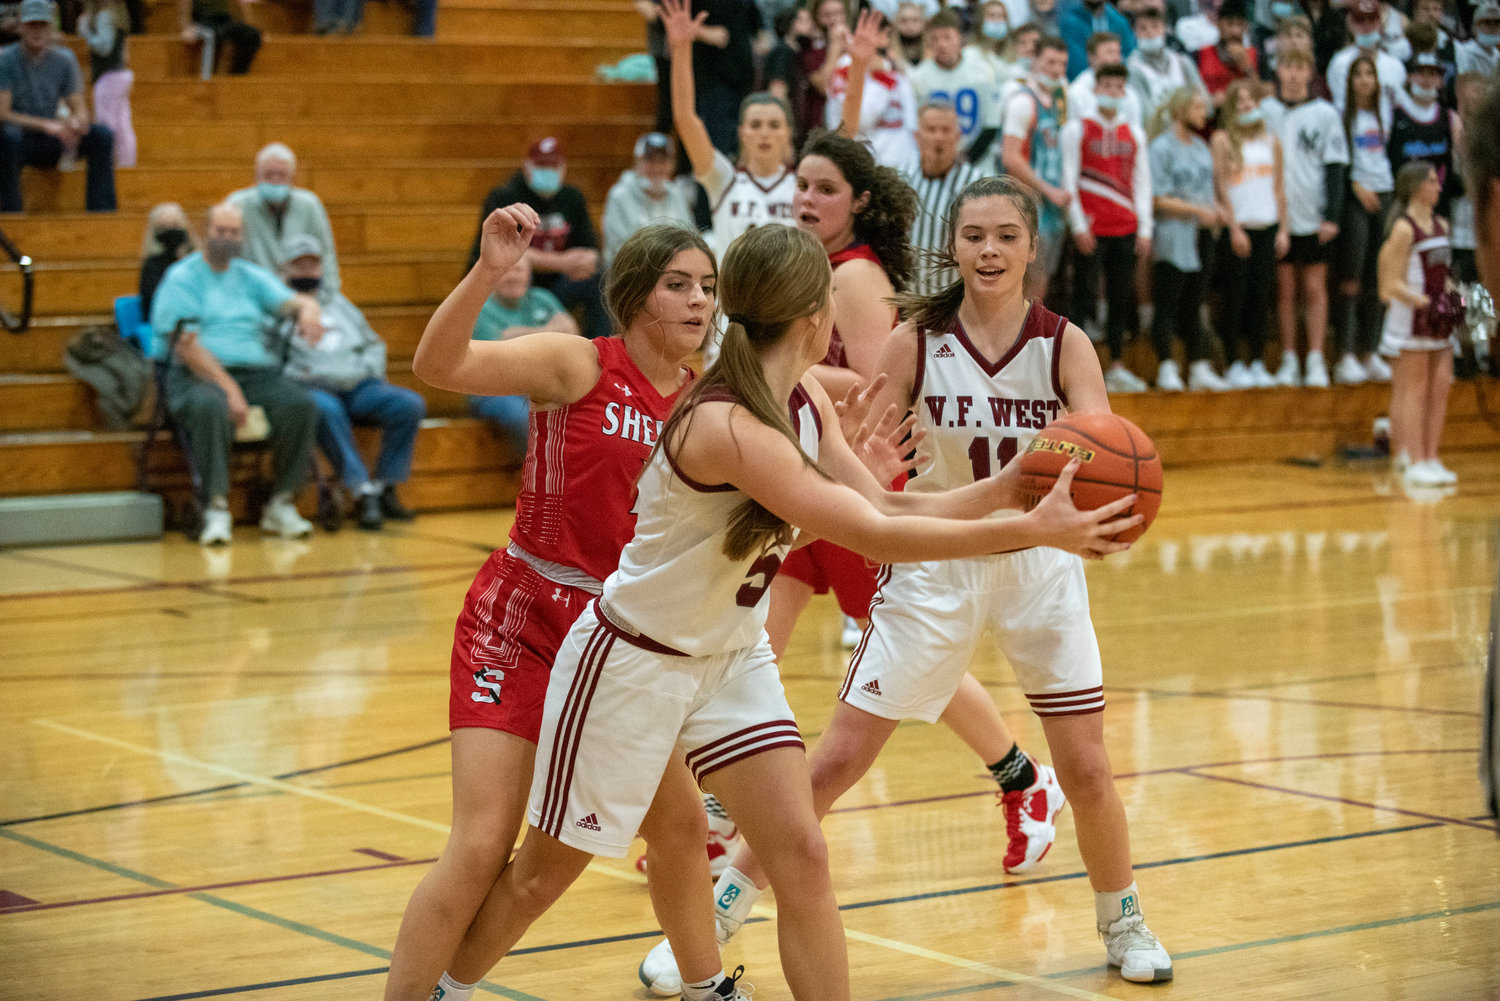 W.F. West's Mak Mencke (5) dishes off a pass to Olivia Remund (11) against Shelton on Dec. 7.